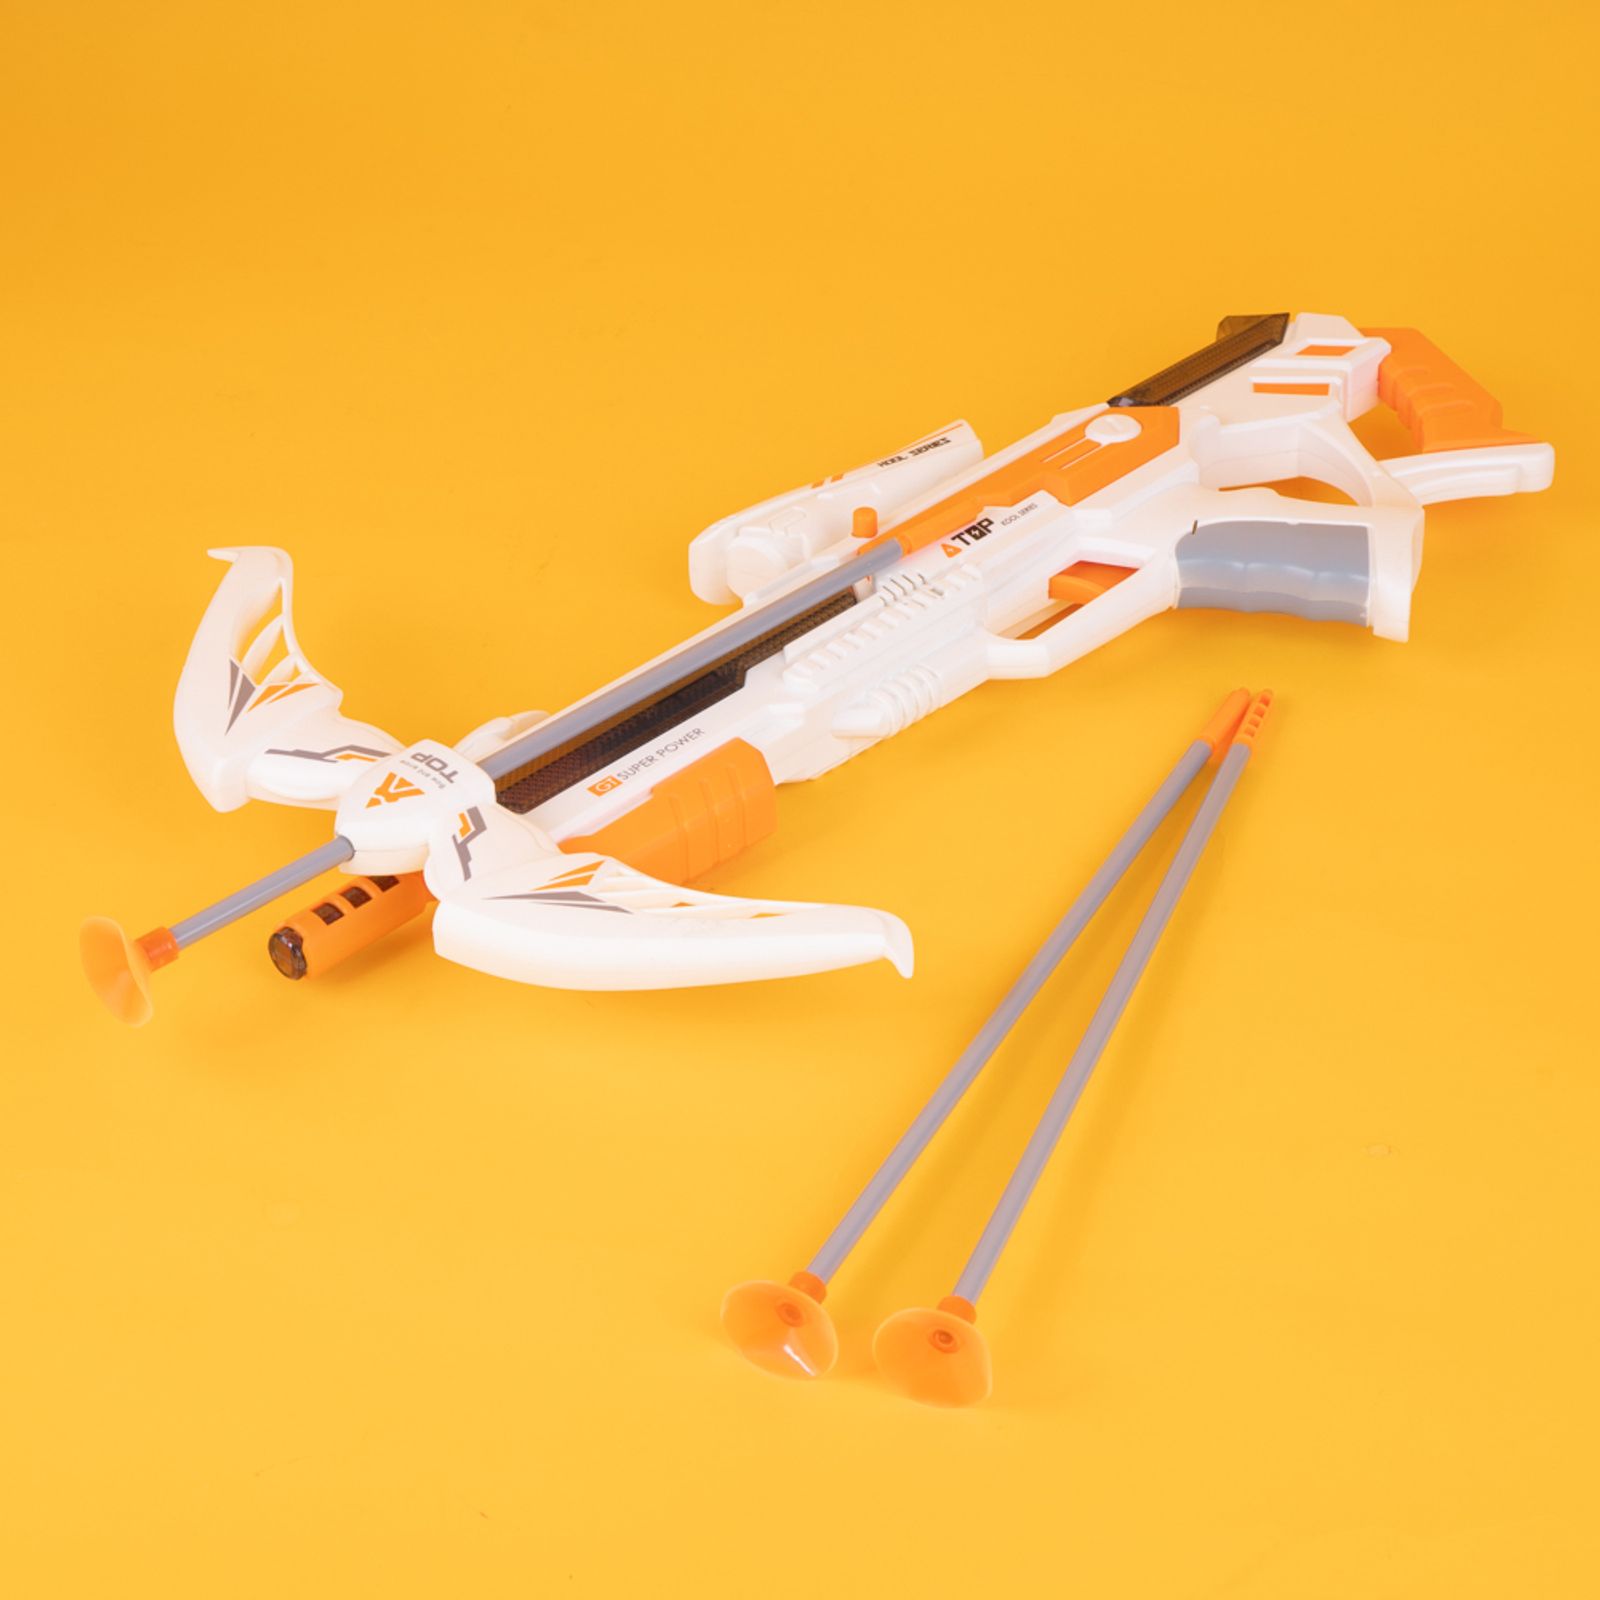 MINISO OUTER SPACE SOUND & LIGHT 2-IN-1 BOW & ARROW 2015587010104 TOY SERIES